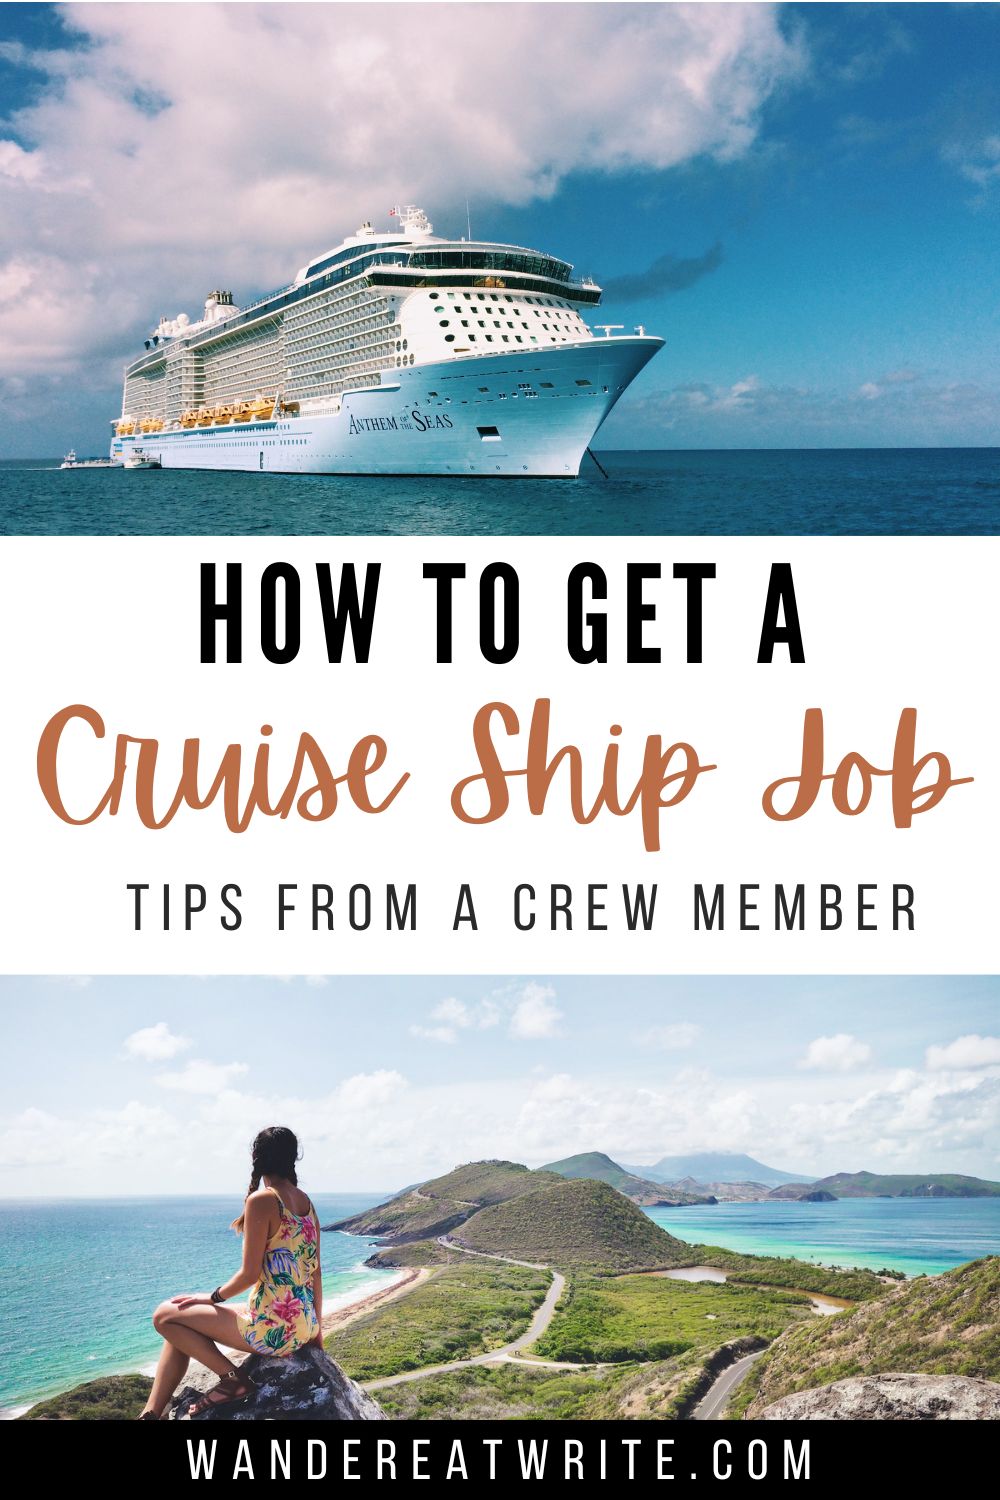 Pin text: How to get a cruise ship job: tips from a crew member. Top photo: cruise ship Anthem of the Seas anchored in turquoise waters. Bottom photo: A woman in a yellow floral romper sits on a rock overlooking two bodies of teal waters separated by small green island mountains